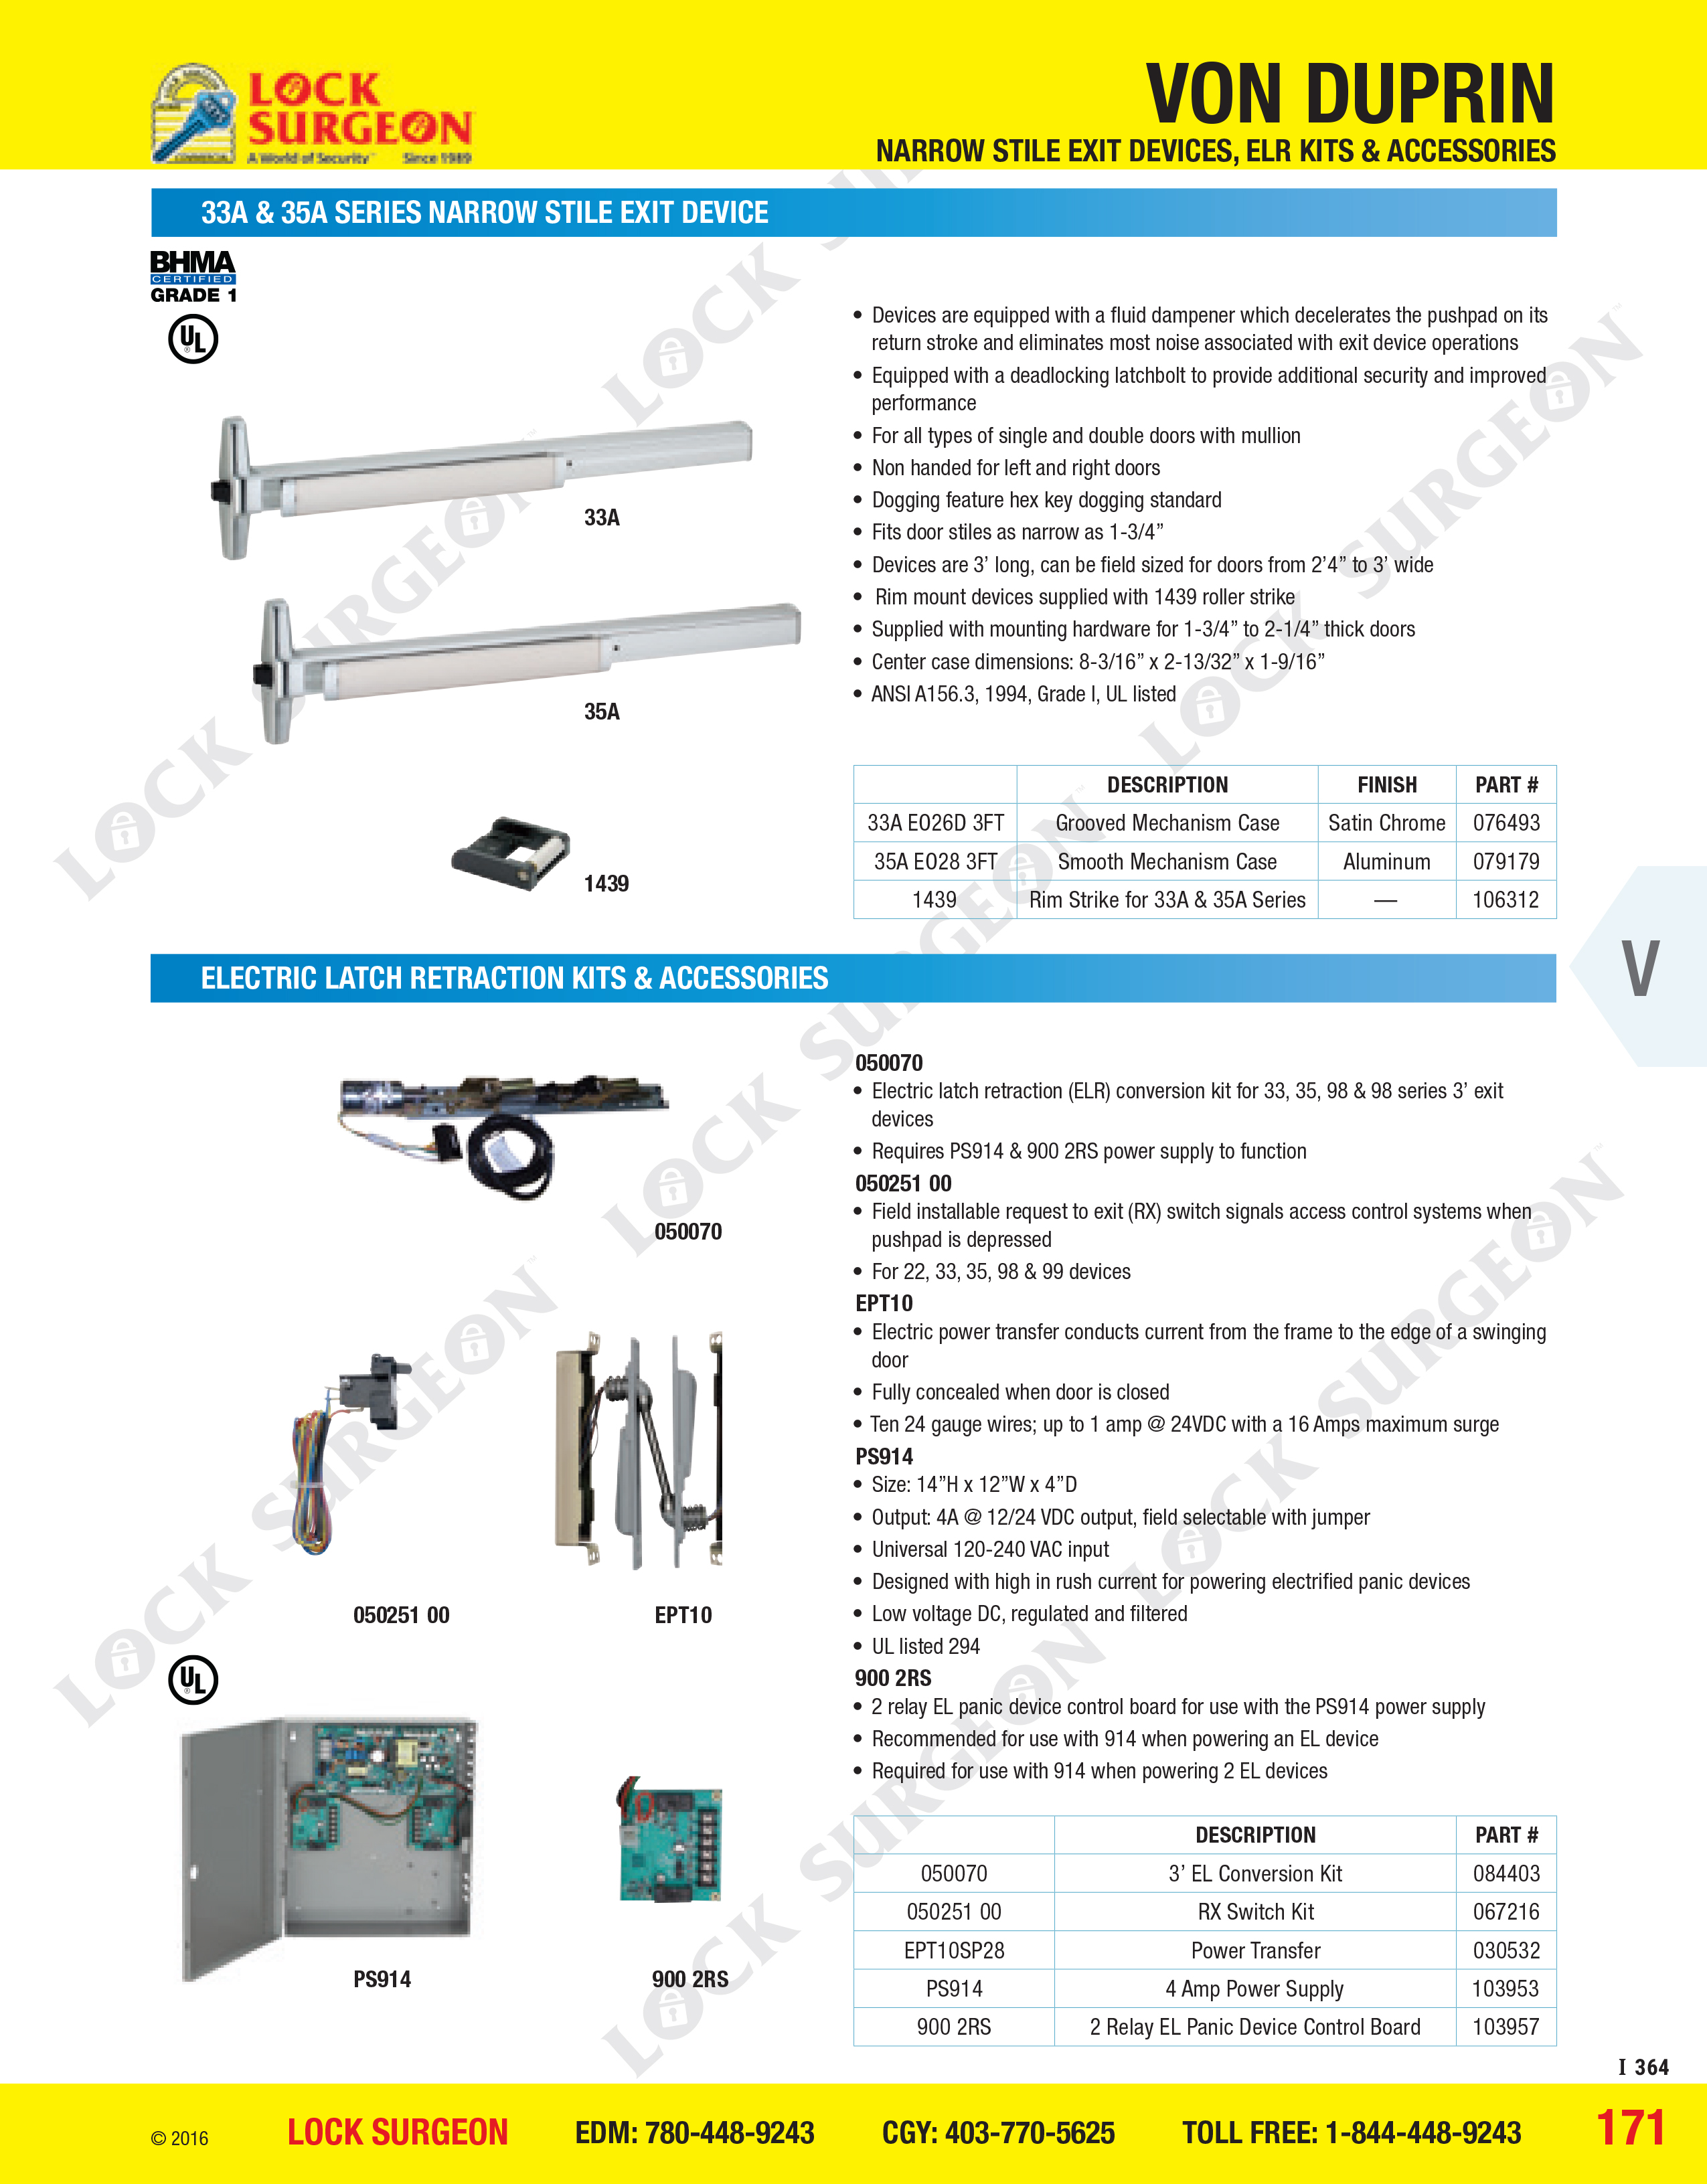 Acheson Von Duprin narrow stile exit device electronic latch retraction kits and accessories.